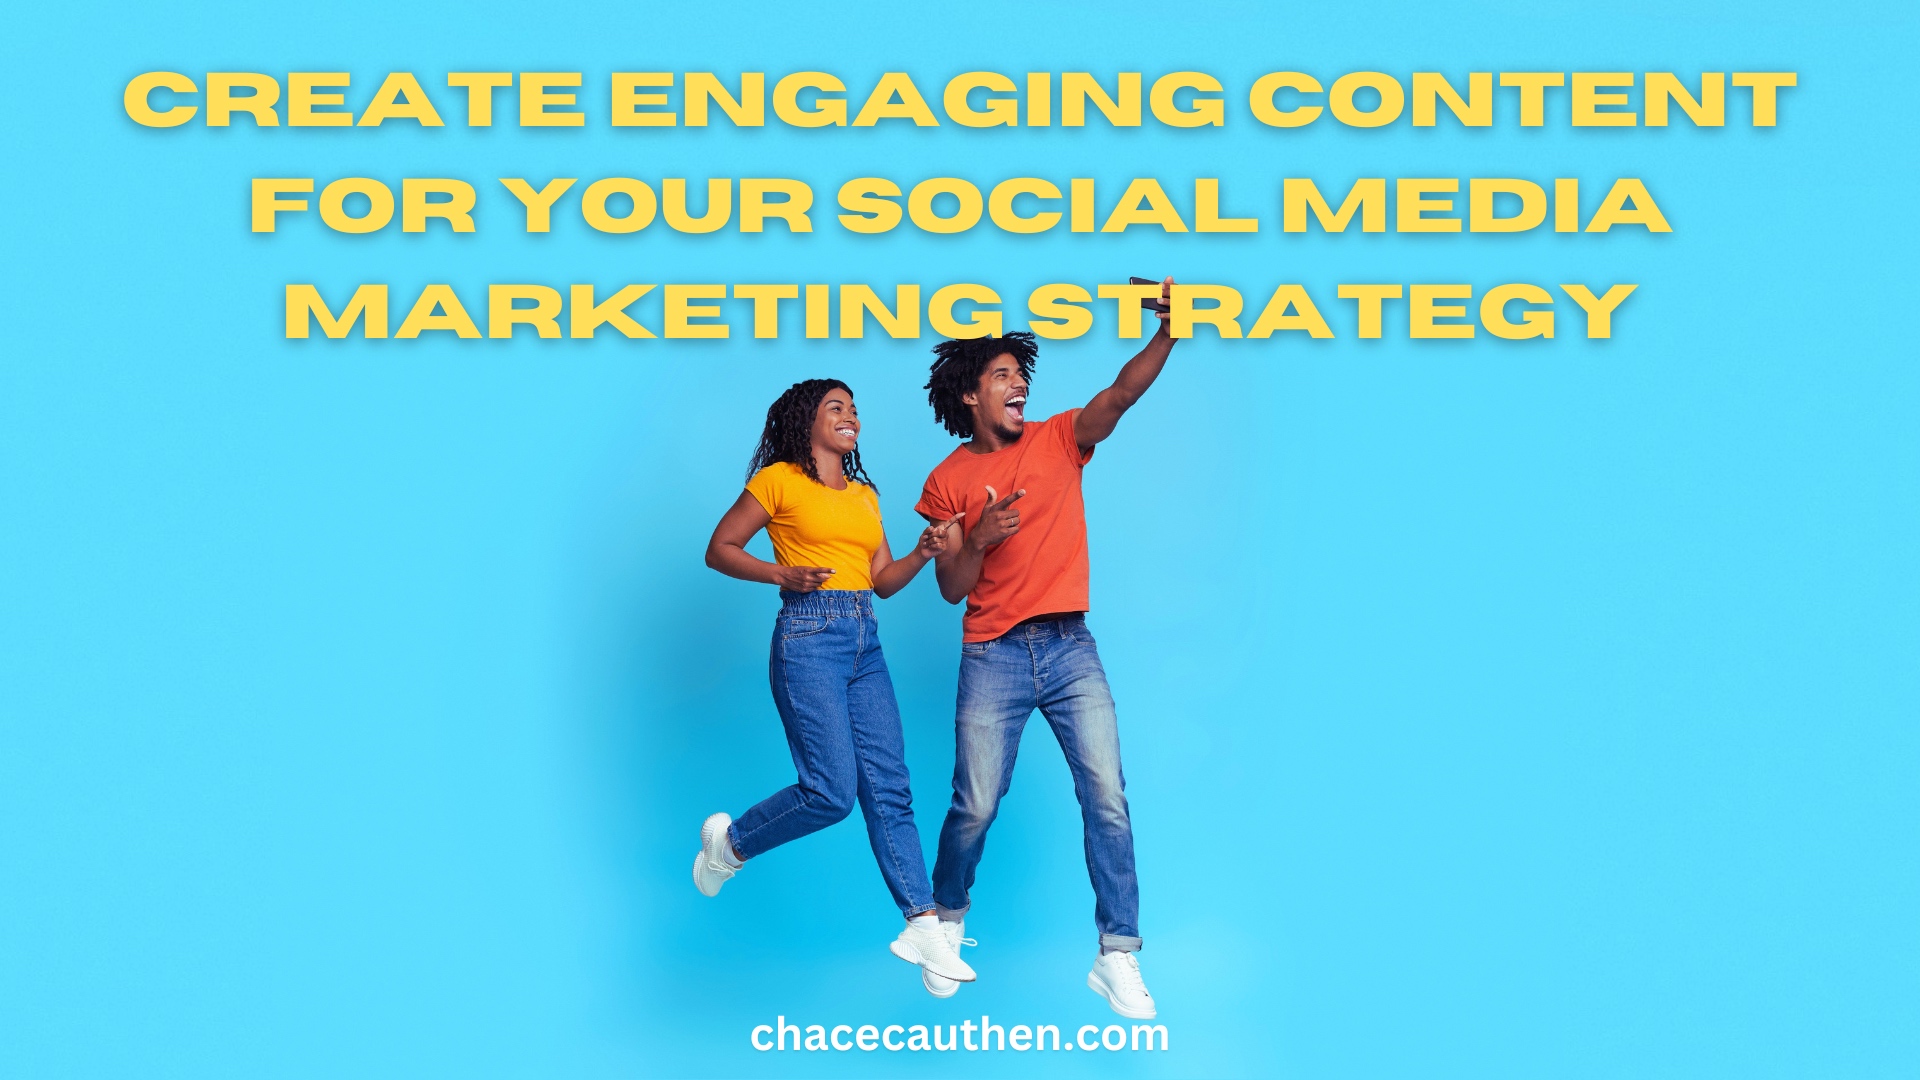 Create engaging content for your social media marketing strategy